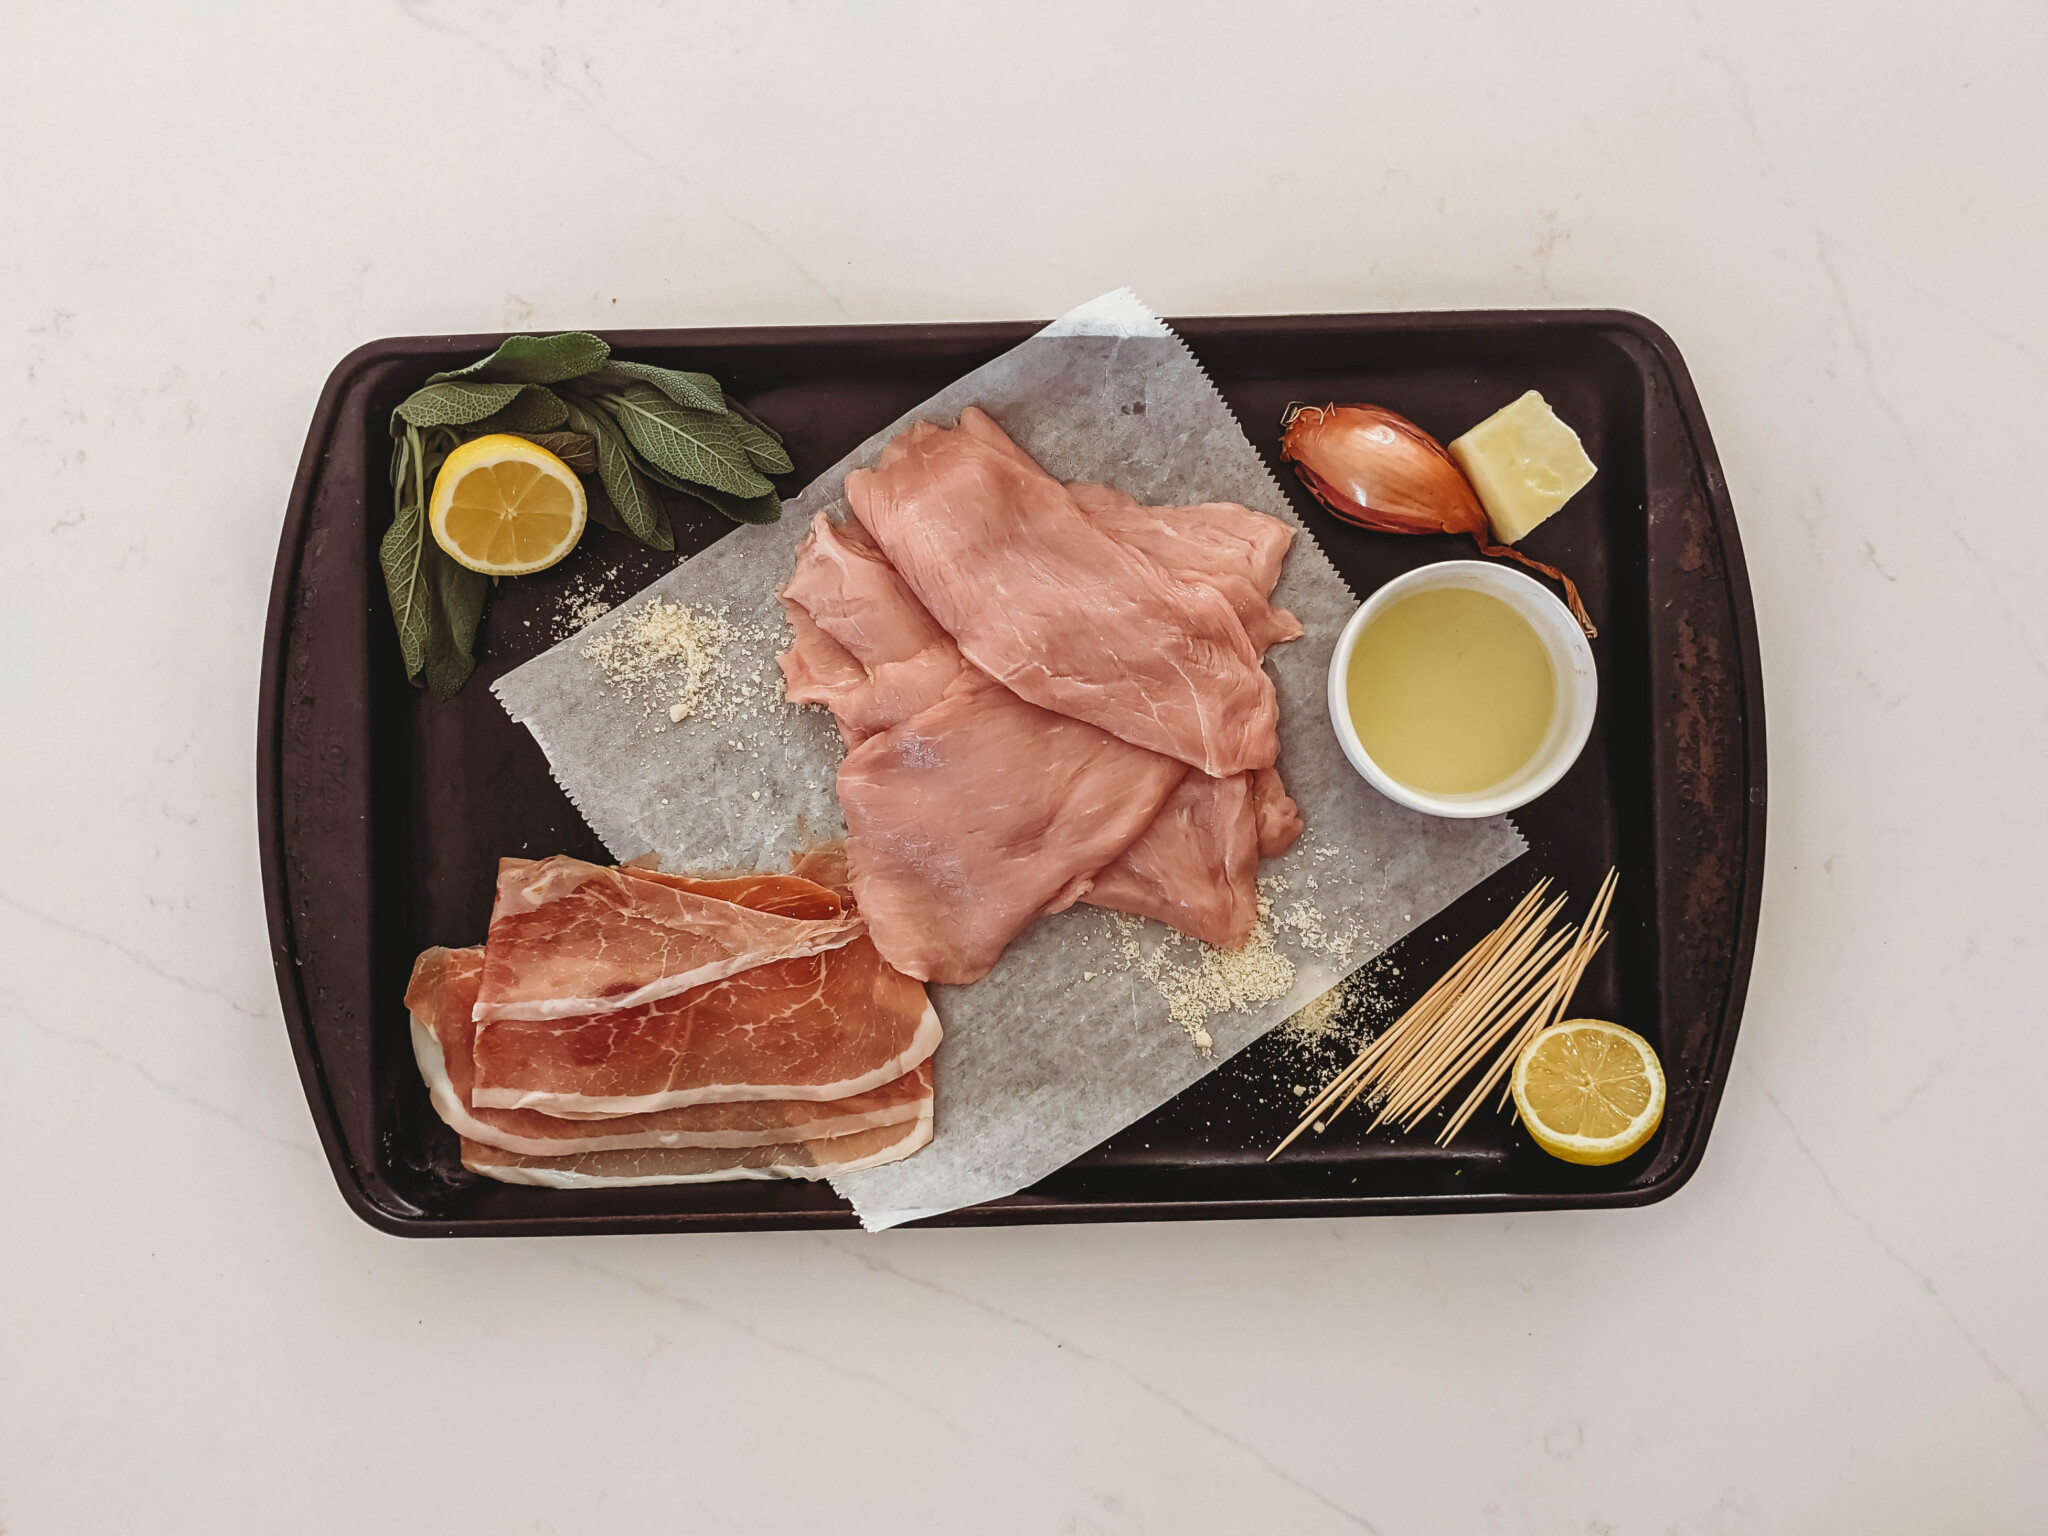 ingredients for veal saltimbocca; raw veal cutlets, lemon, prosciutto, sage, butter, oil